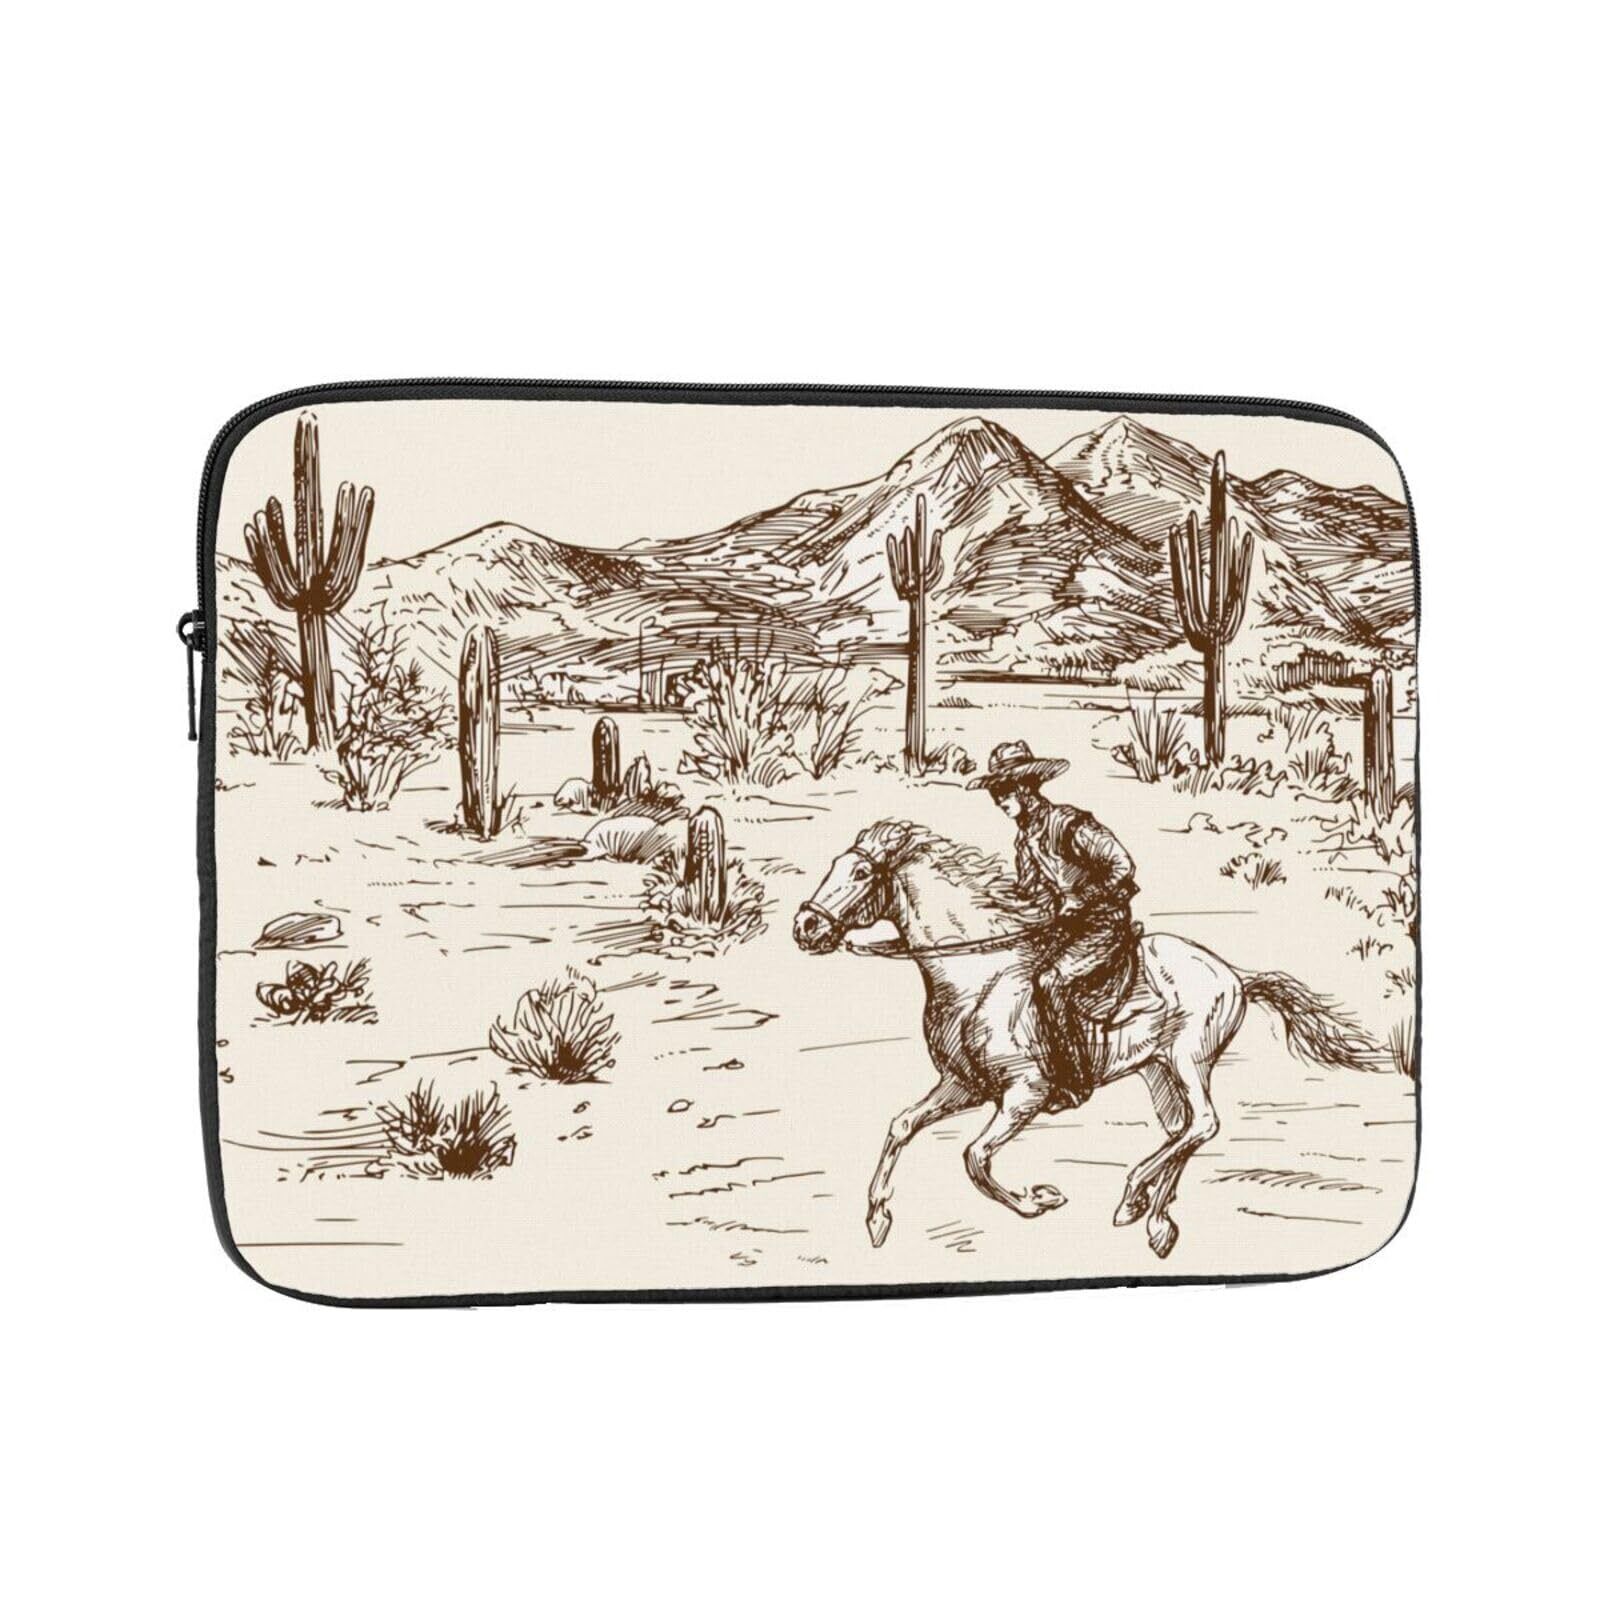 Wild West Desert Cowboy 17 inch Portable Laptop Sleeve Compatible with MacBoo...